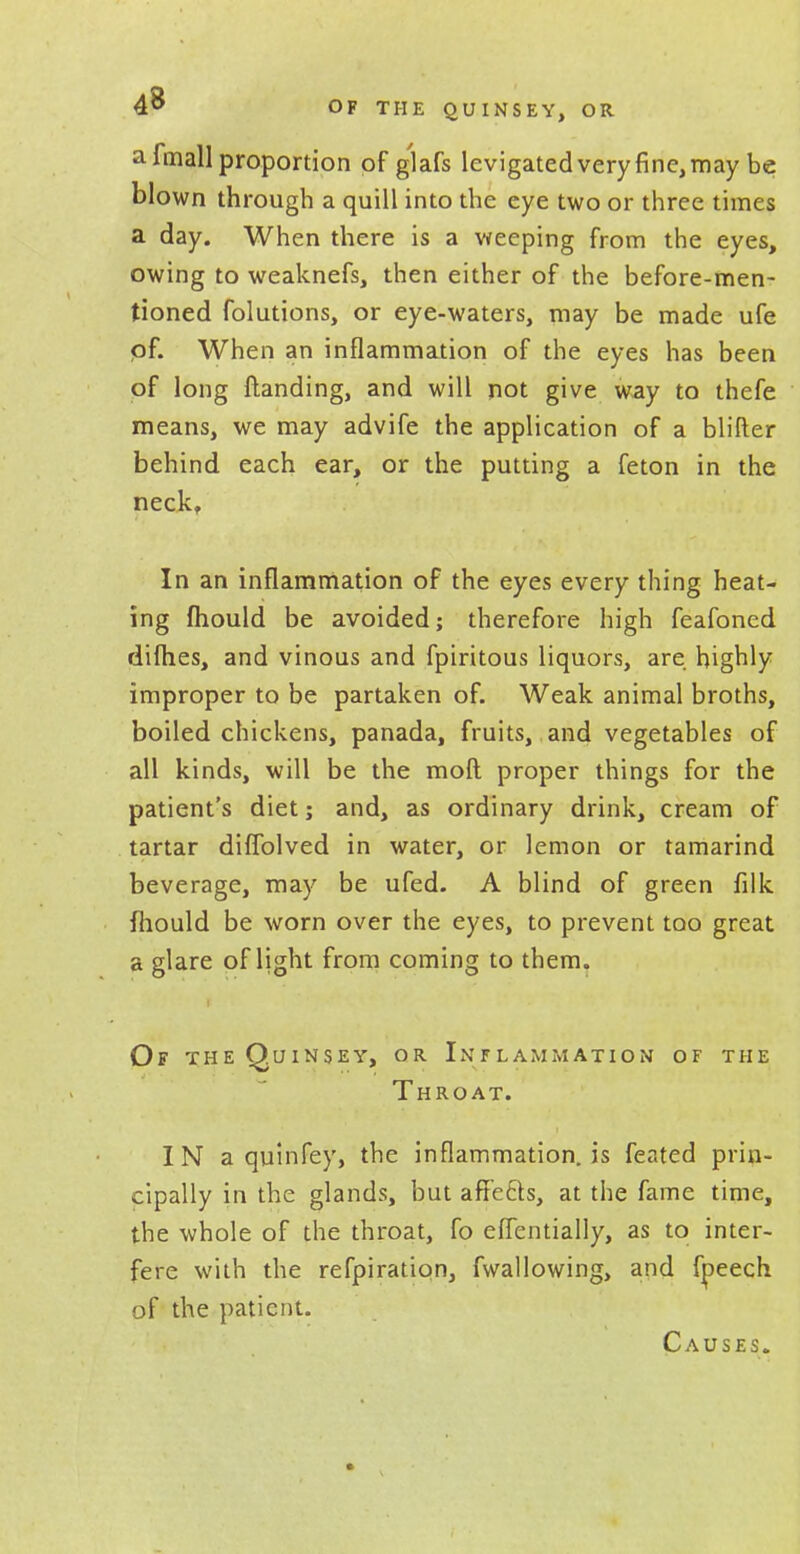 4^ OF THE QUINSEY, OR a fmall proportion of glafs levigated very fine, may be blown through a quill into the eye two or three times a day. When there is a weeping from the eyes, owing to weaknefs, then either of the before-men- tioned folutions, or eye-waters, may be made ufe pf. When an inflammation of the eyes has been of long Handing, and will not give way to thefe means, we may advife the application of a blifter behind each ear, or the putting a feton in the neck, In an inflammation of the eyes every thing heat- ing ftiould be avoided; therefore high feafoned dilh.es, and vinous and fpiritous liquors, are highly improper to be partaken of. Weak animal broths, boiled chickens, panada, fruits, and vegetables of all kinds, will be the moft proper things for the patient's diet; and, as ordinary drink, cream of tartar diffolved in water, or lemon or tamarind beverage, may be ufed. A blind of green filk fhould be worn over the eyes, to prevent too great a glare of light from coming to them. Of the Quinsey, or Inflammation of the Throat. IN a quinfey, the inflammation, is feated prin- cipally in the glands, but affects, at the fame time, the whole of the throat, fo eflentially, as to inter- fere with the refpiration, fwallowing, and frjeech of the patient. Causes.